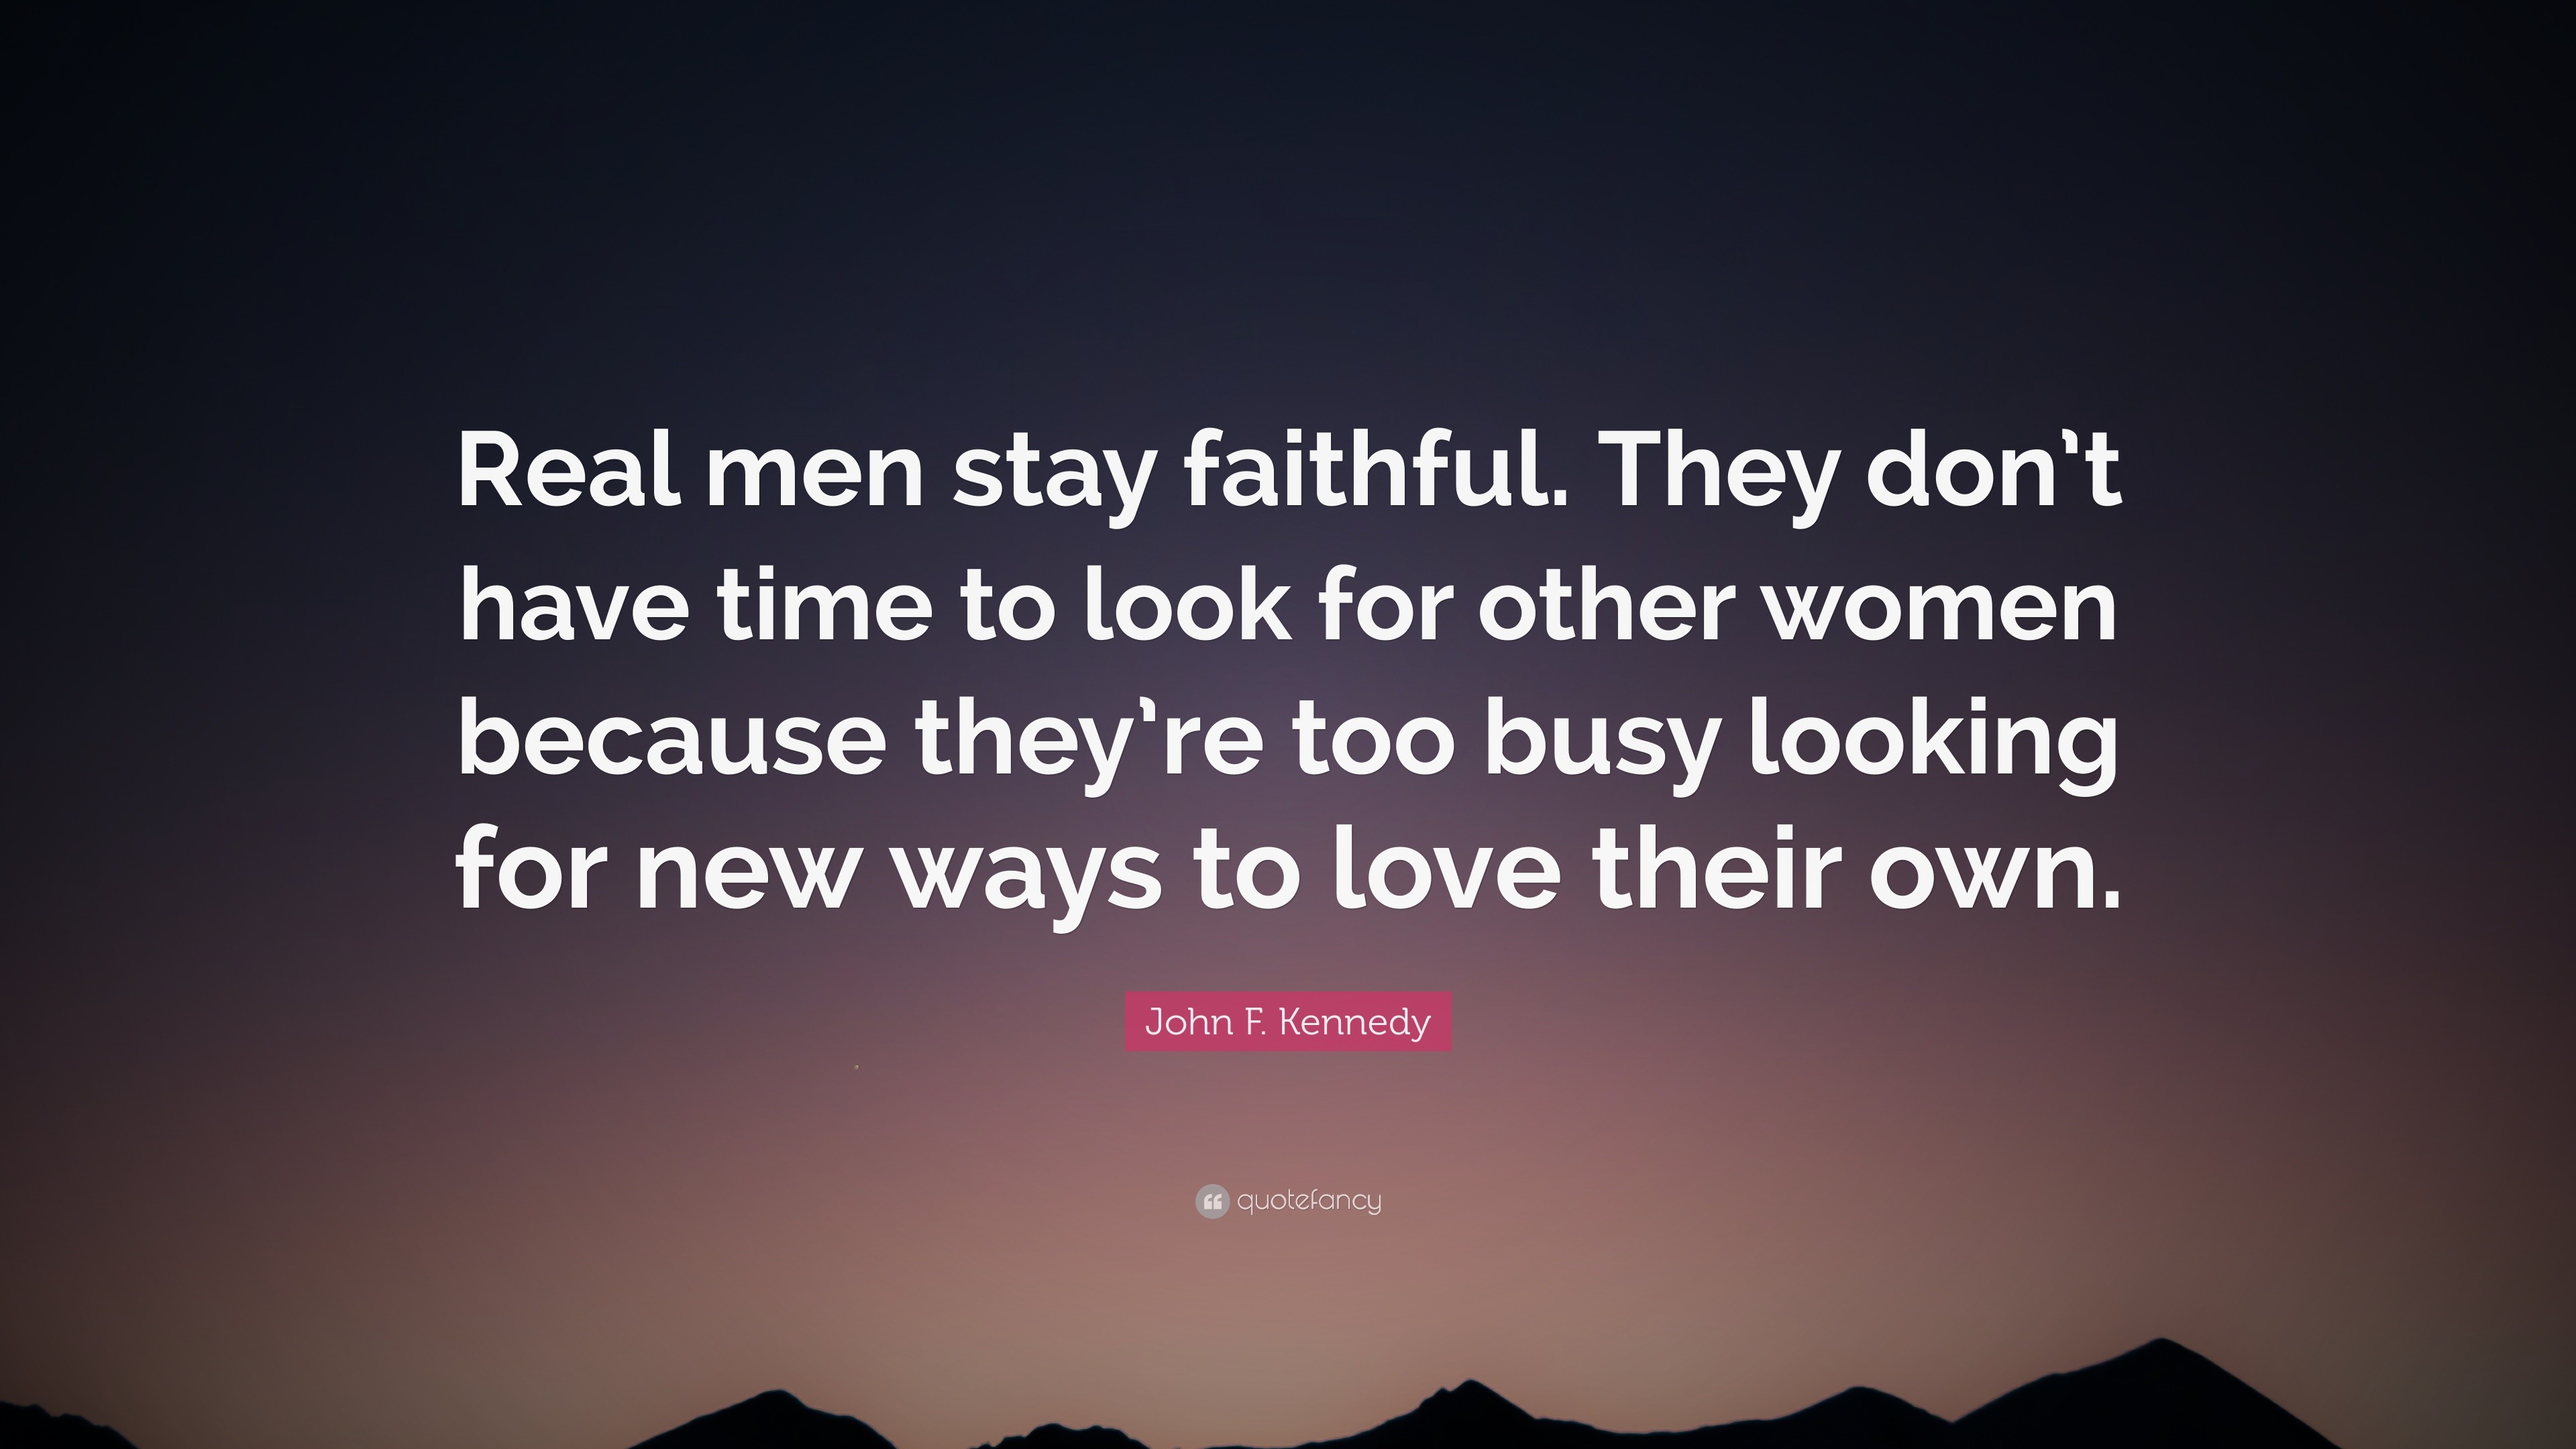 John F Kennedy Quote “Real men stay faithful They don t